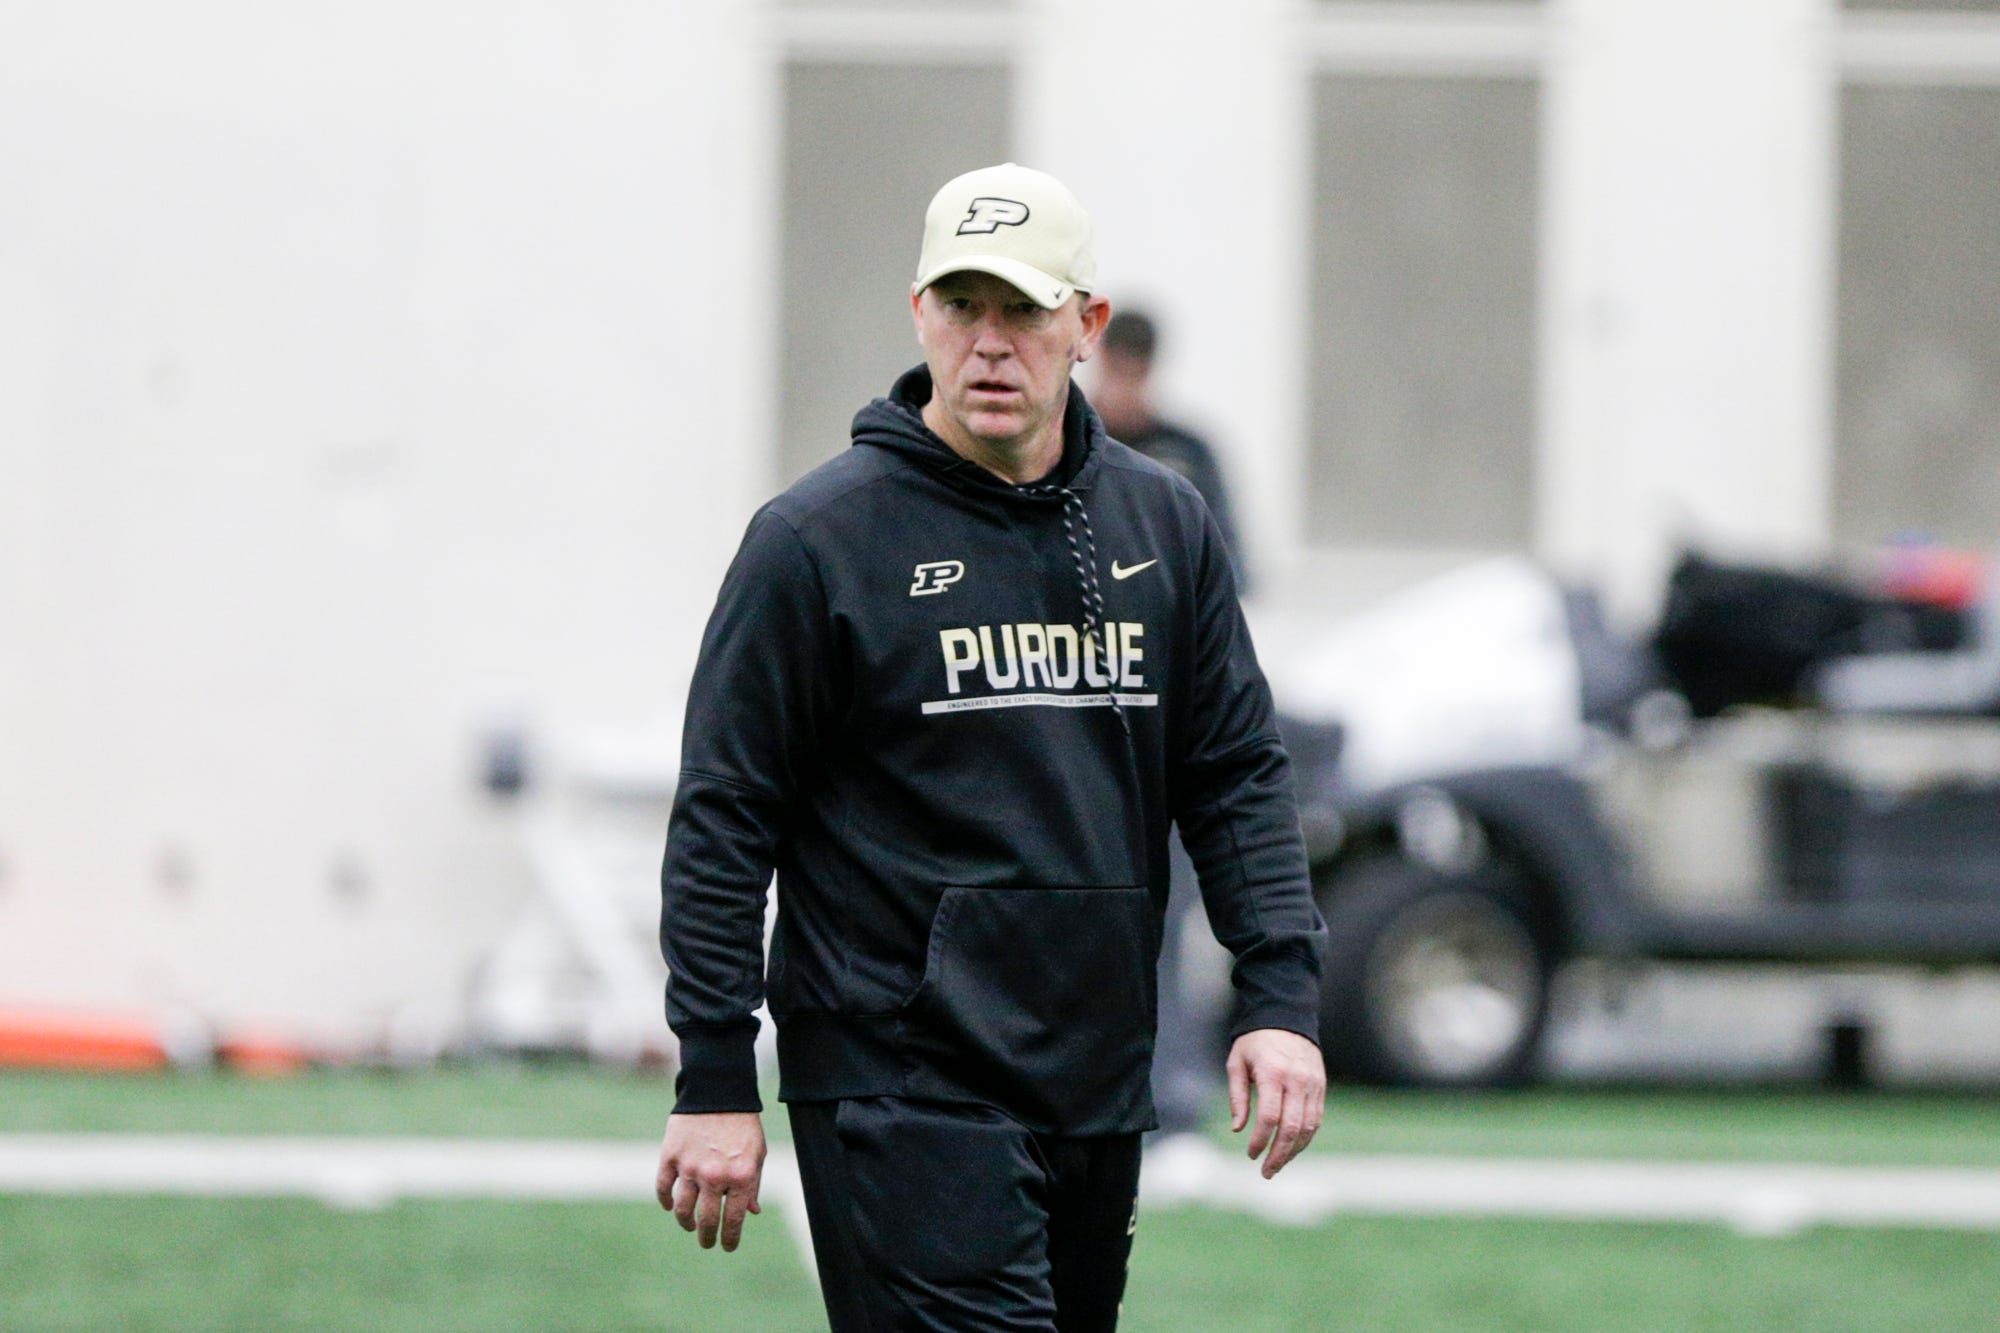 Purdue files appeal to permit coach Jeff Brohm to communicate remotely during Saturday's game